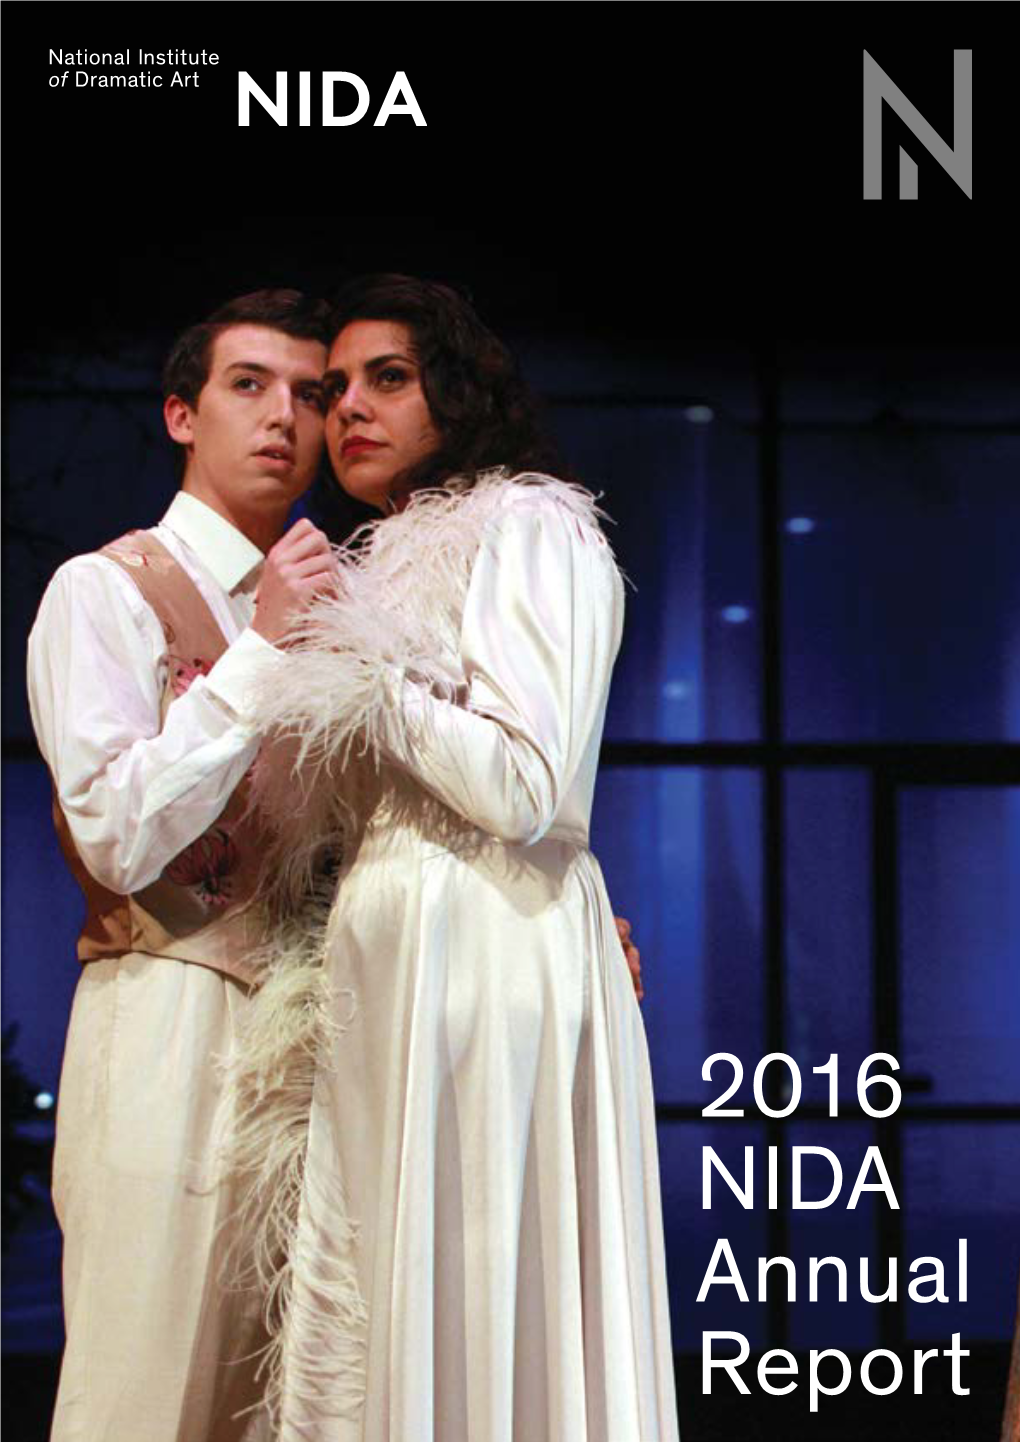 2016 NIDA Annual Report ABOUT NIDA